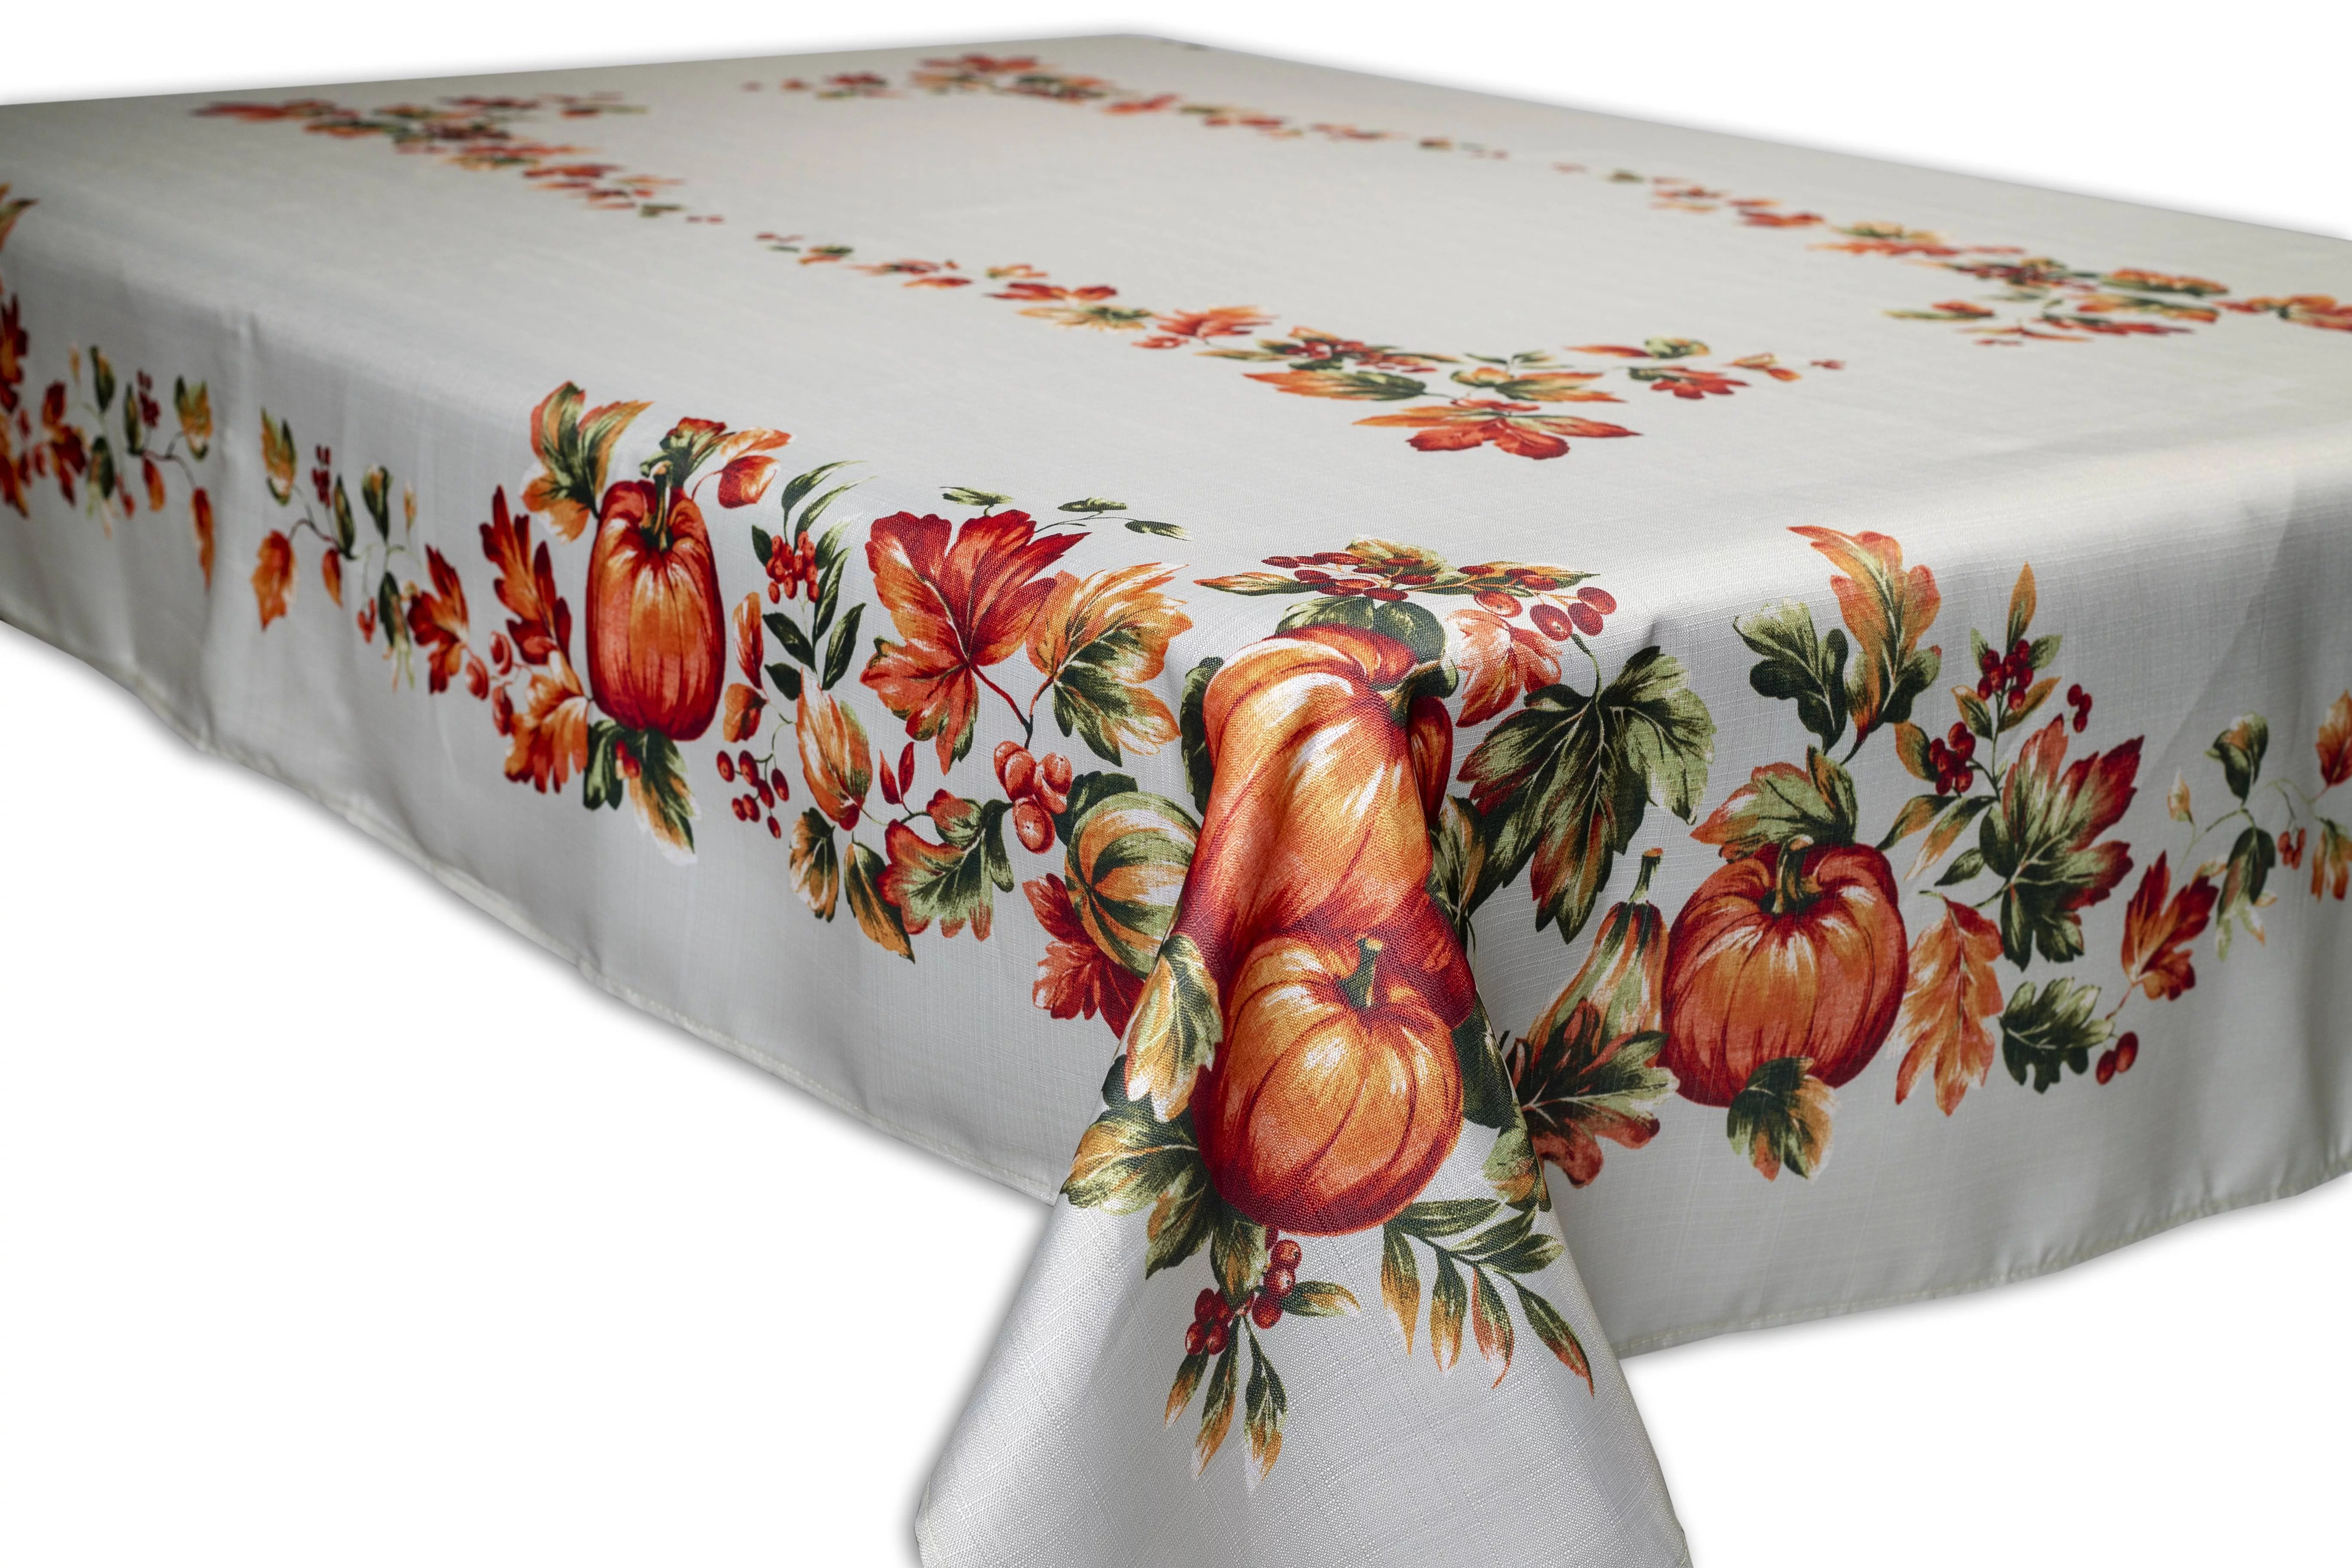 The tablecloth